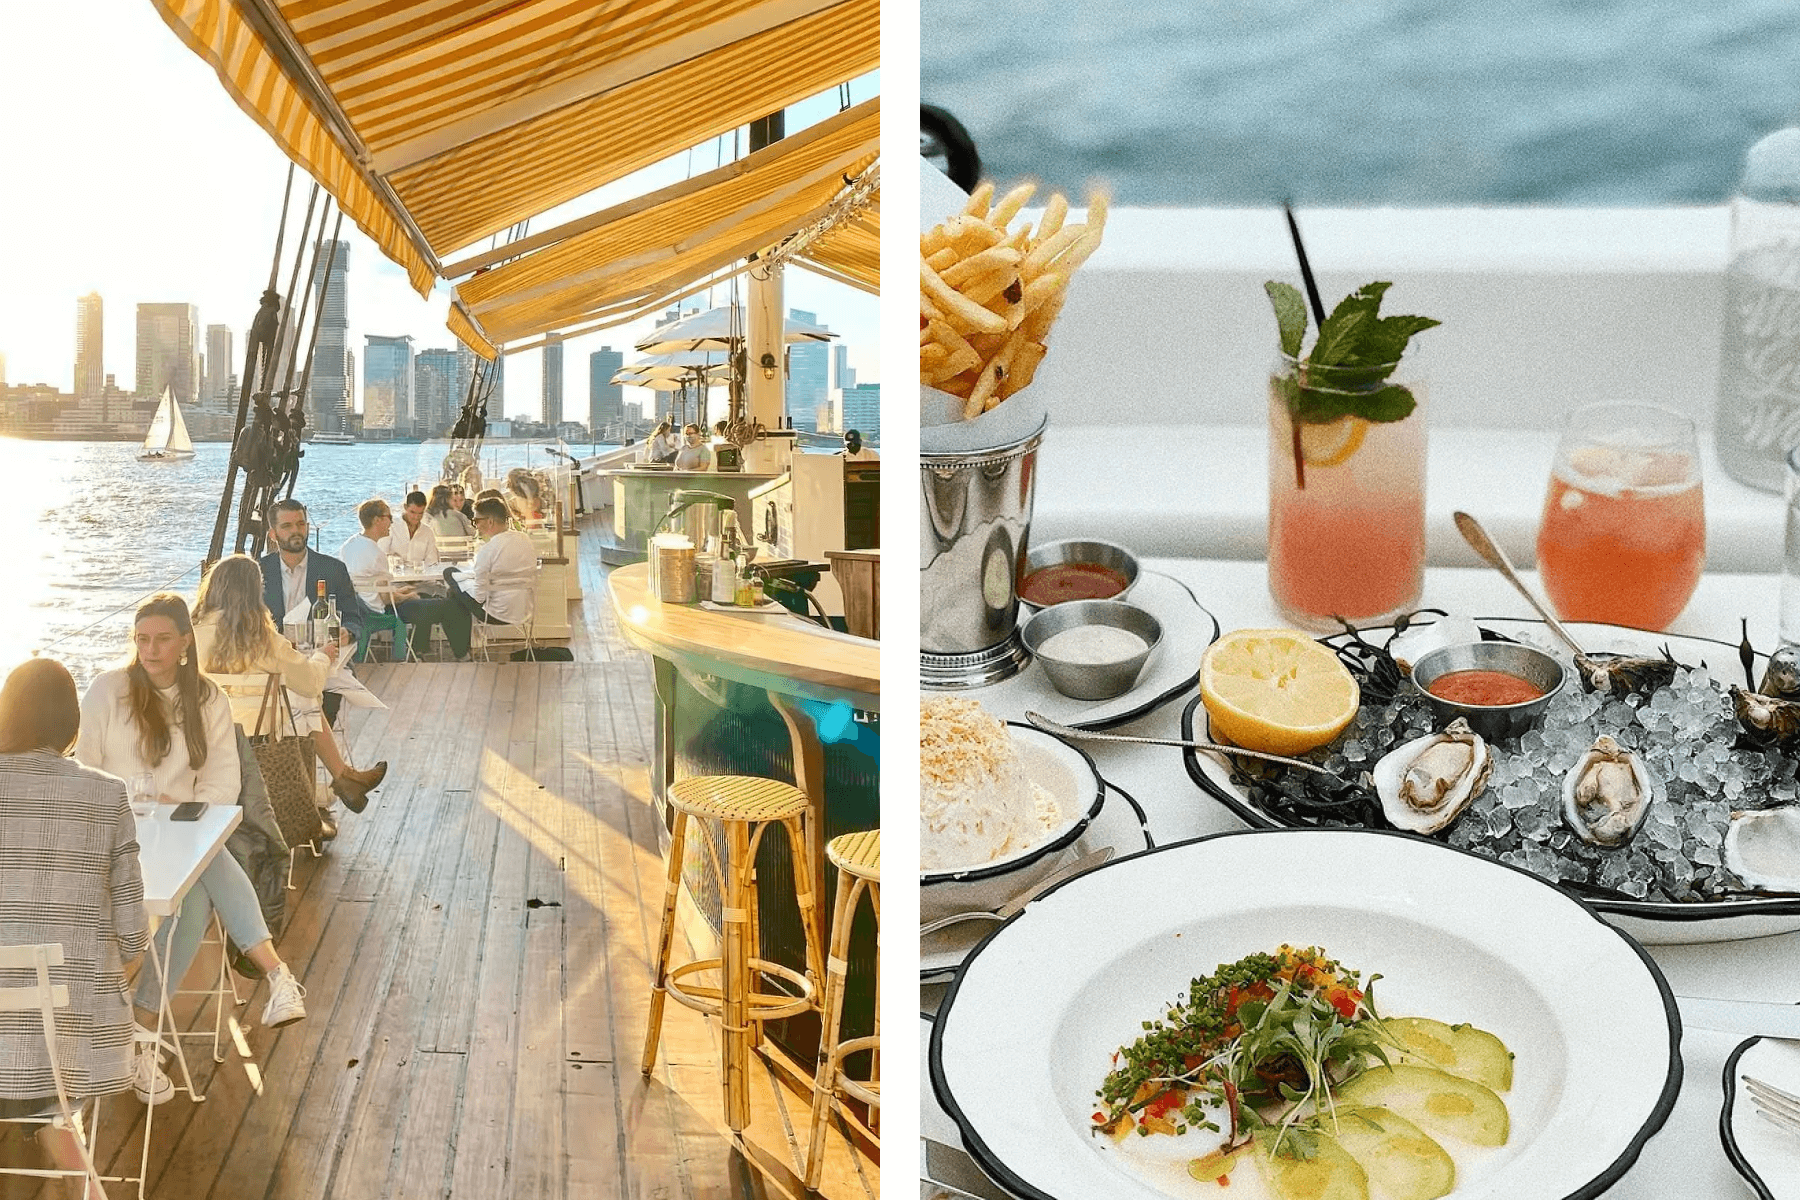 Left: People enjoying drinks on a boat bar; Right: A close up of drinks and apps at Grand Banks including oysters and french fries.